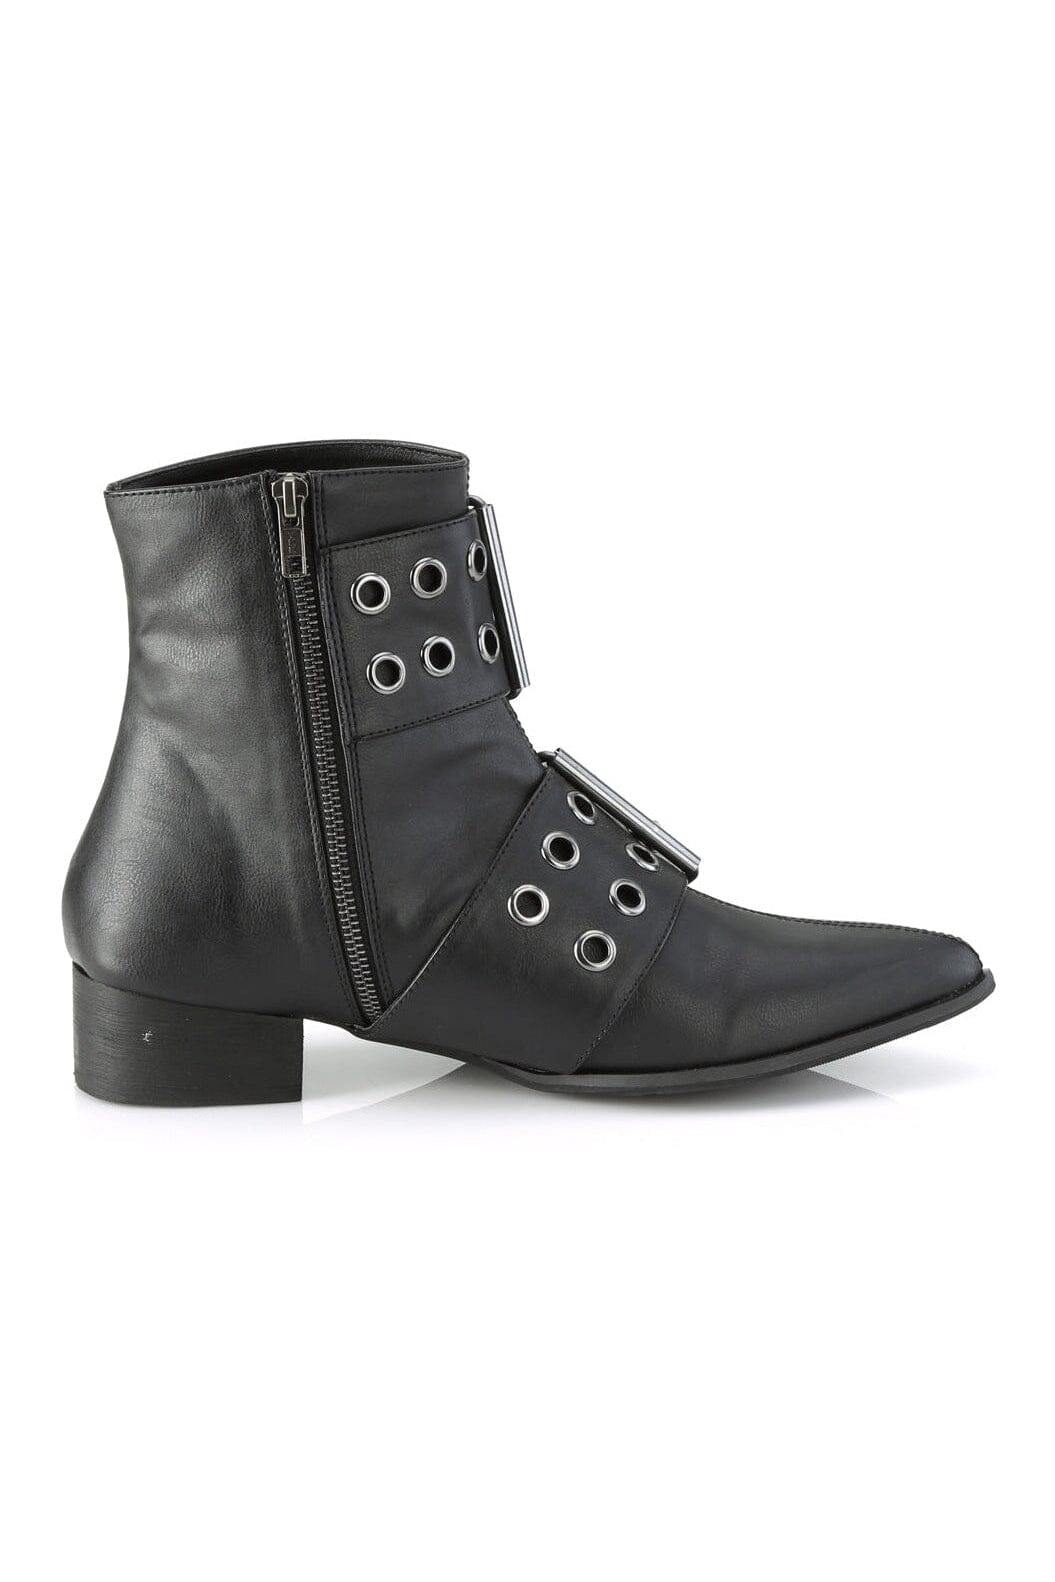 WARLOCK-55 Black Vegan Leather Ankle Boot-Ankle Boots-Demonia-SEXYSHOES.COM